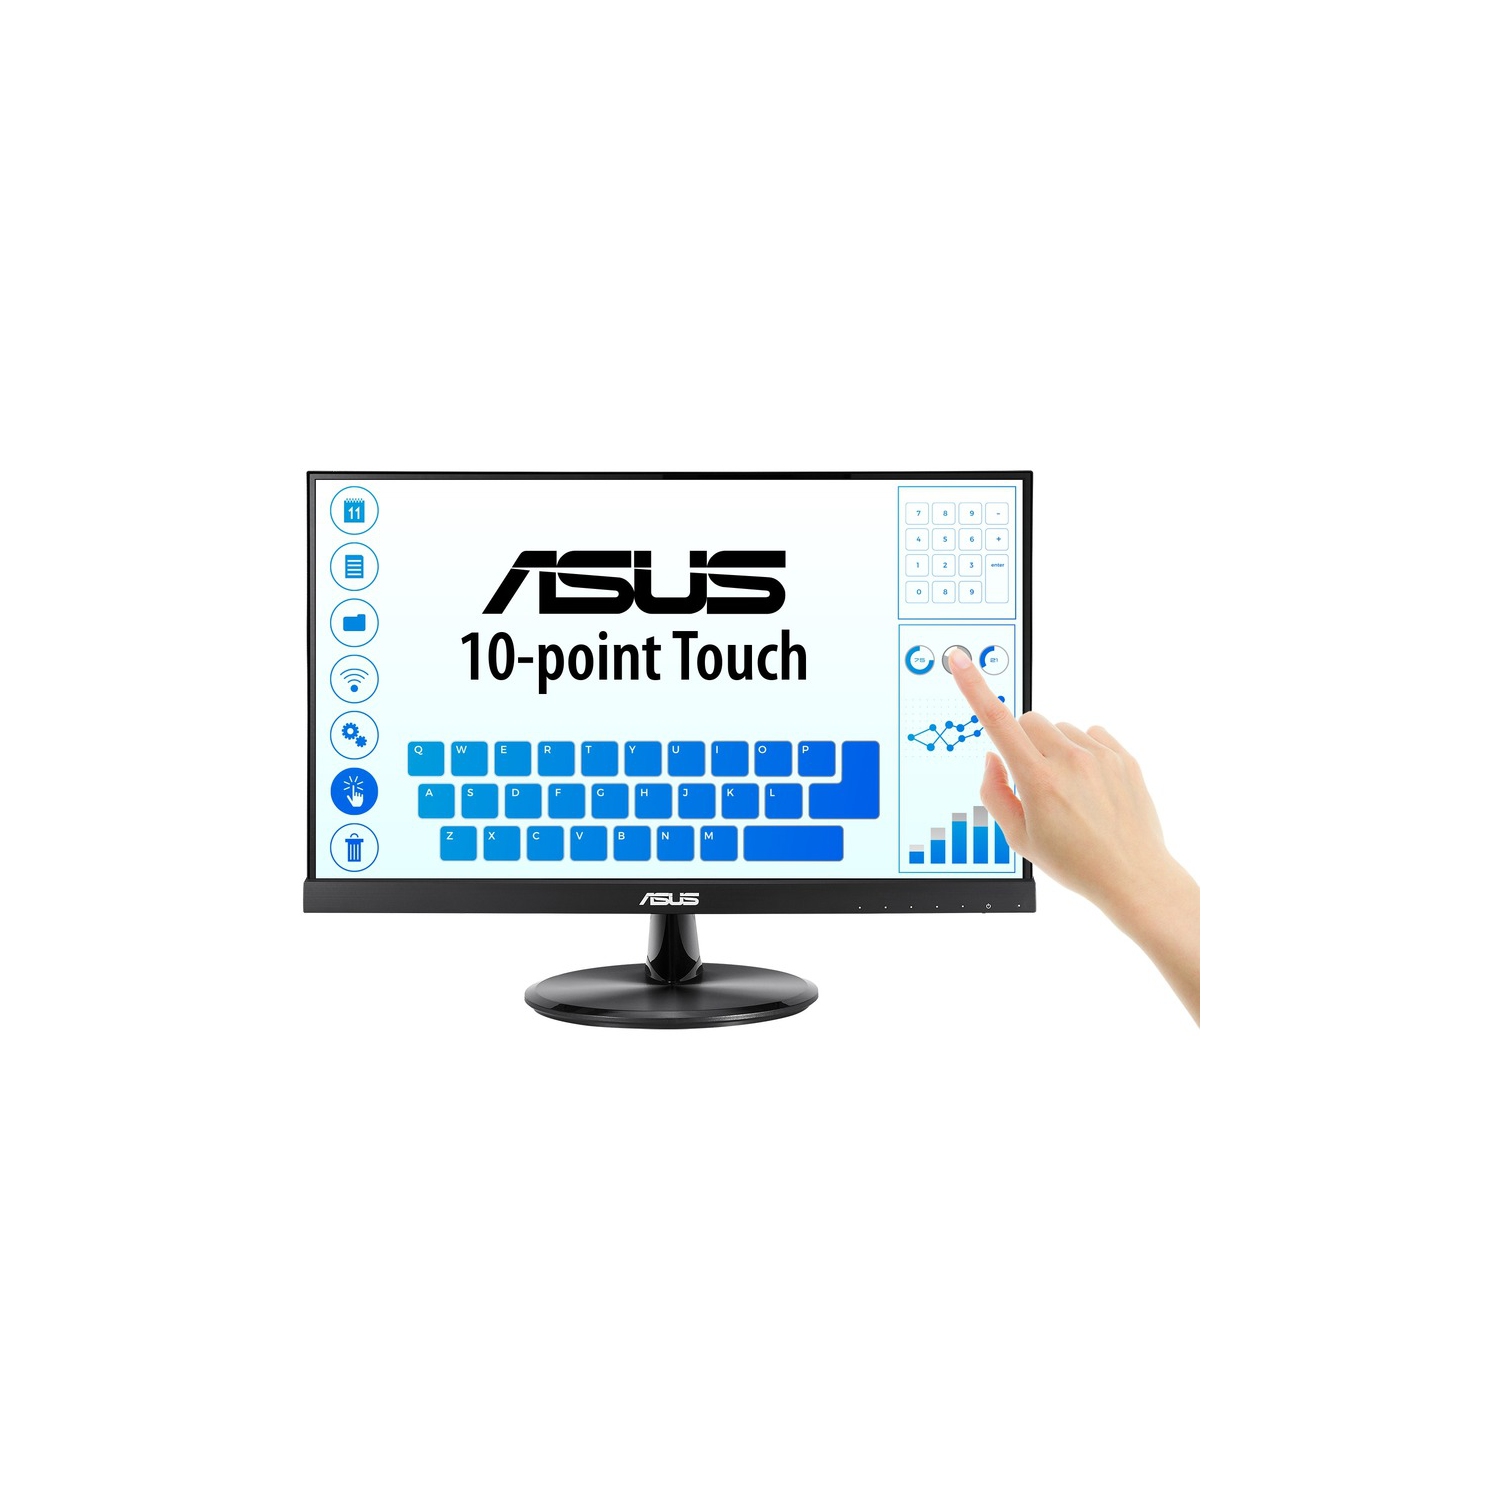 Asus VT229H 21.5" LCD Touchscreen Monitor - 16:9 - 5 ms GTG